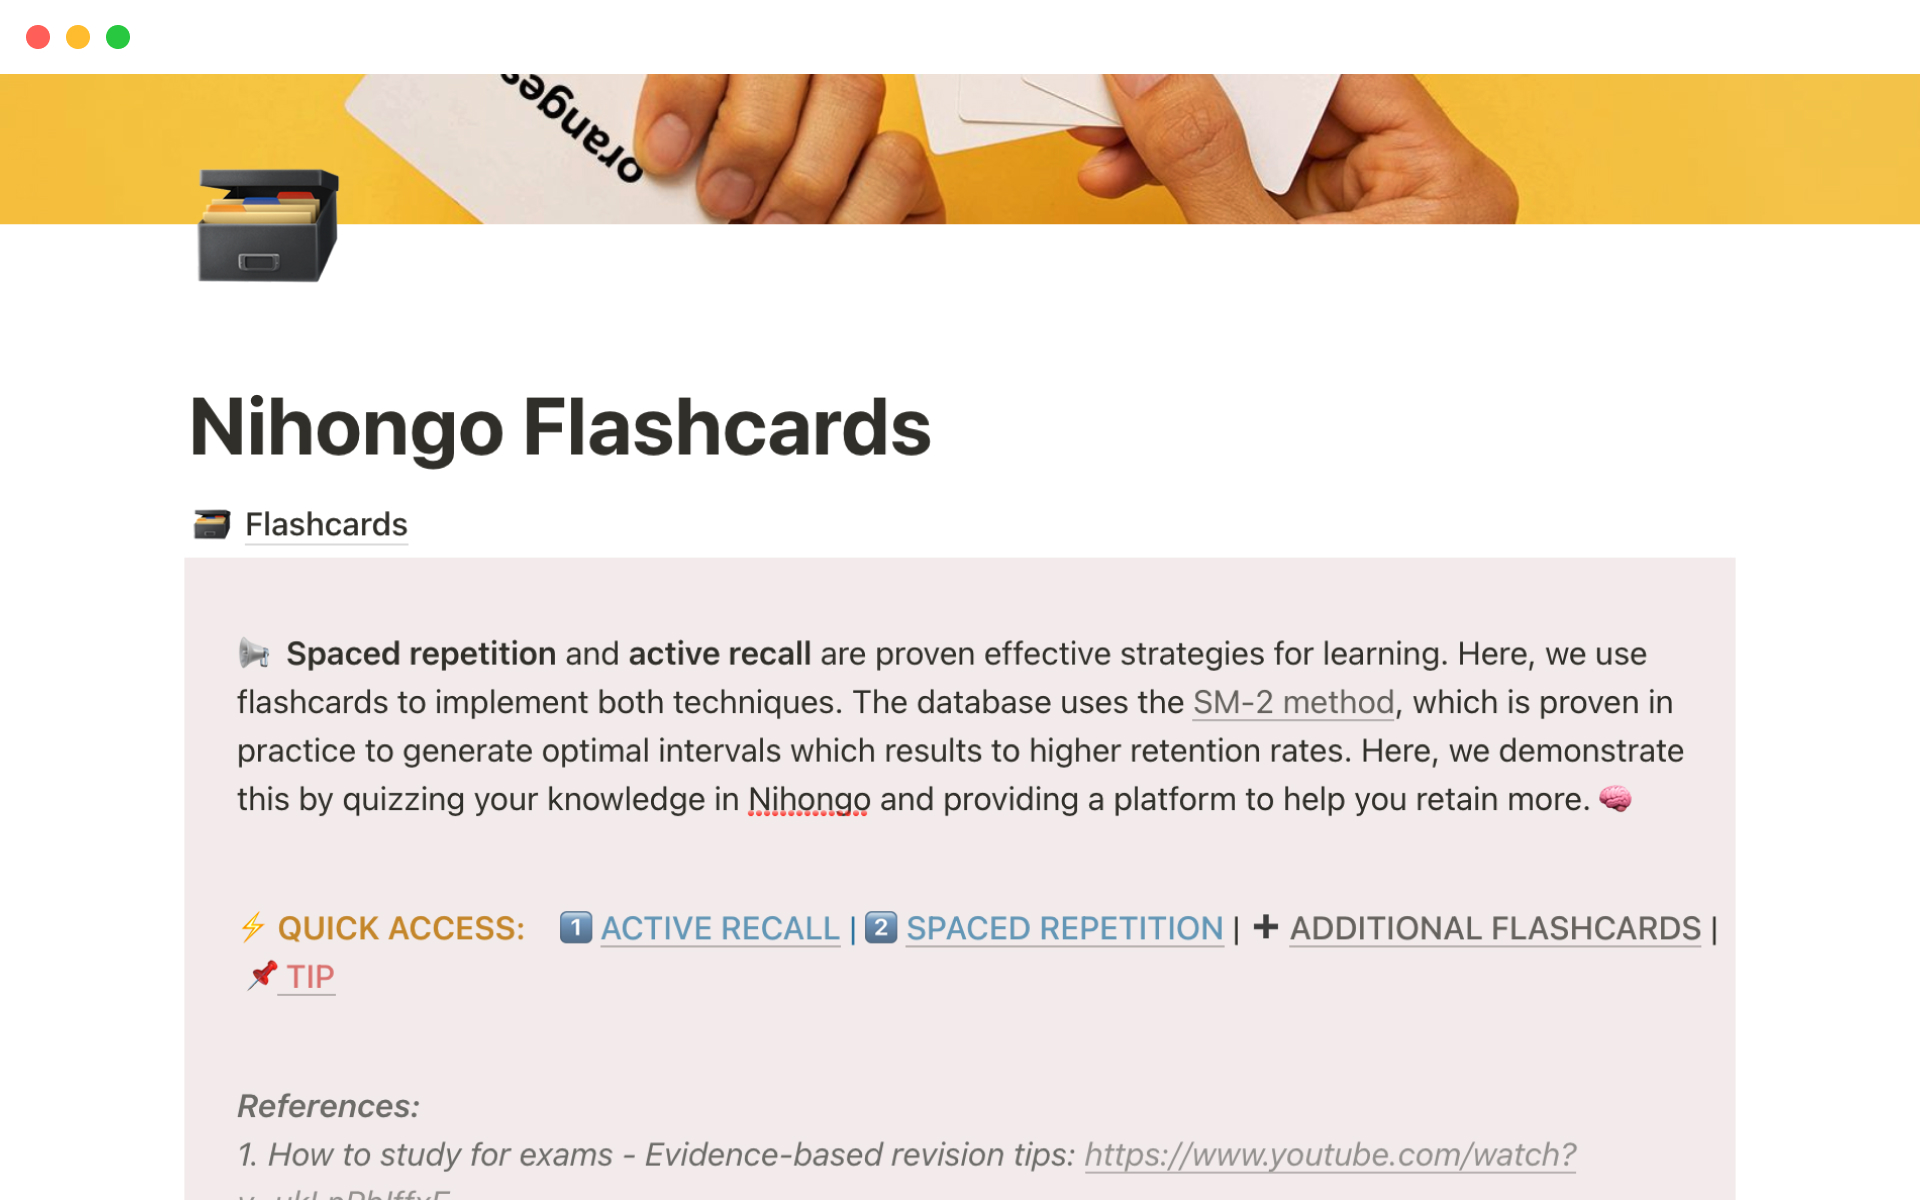 Flashcard - What Is a Flashcard? Definition, Types, Uses